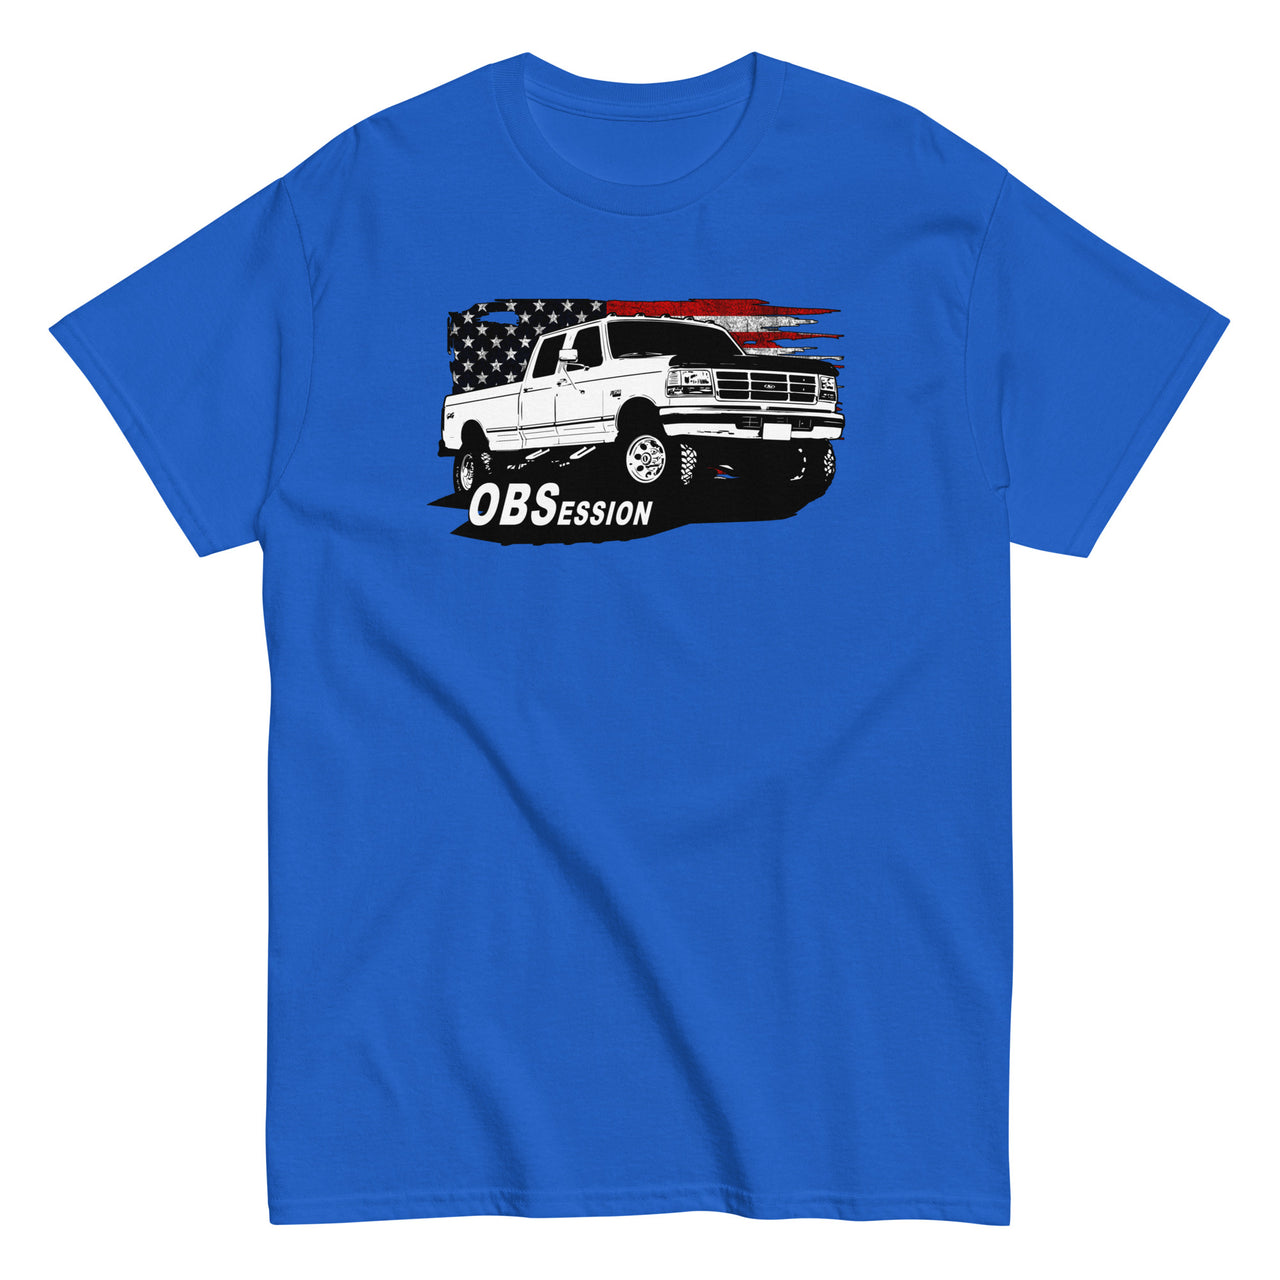 OBS Crew Cab Truck American Flag T-Shirt modeled in royal